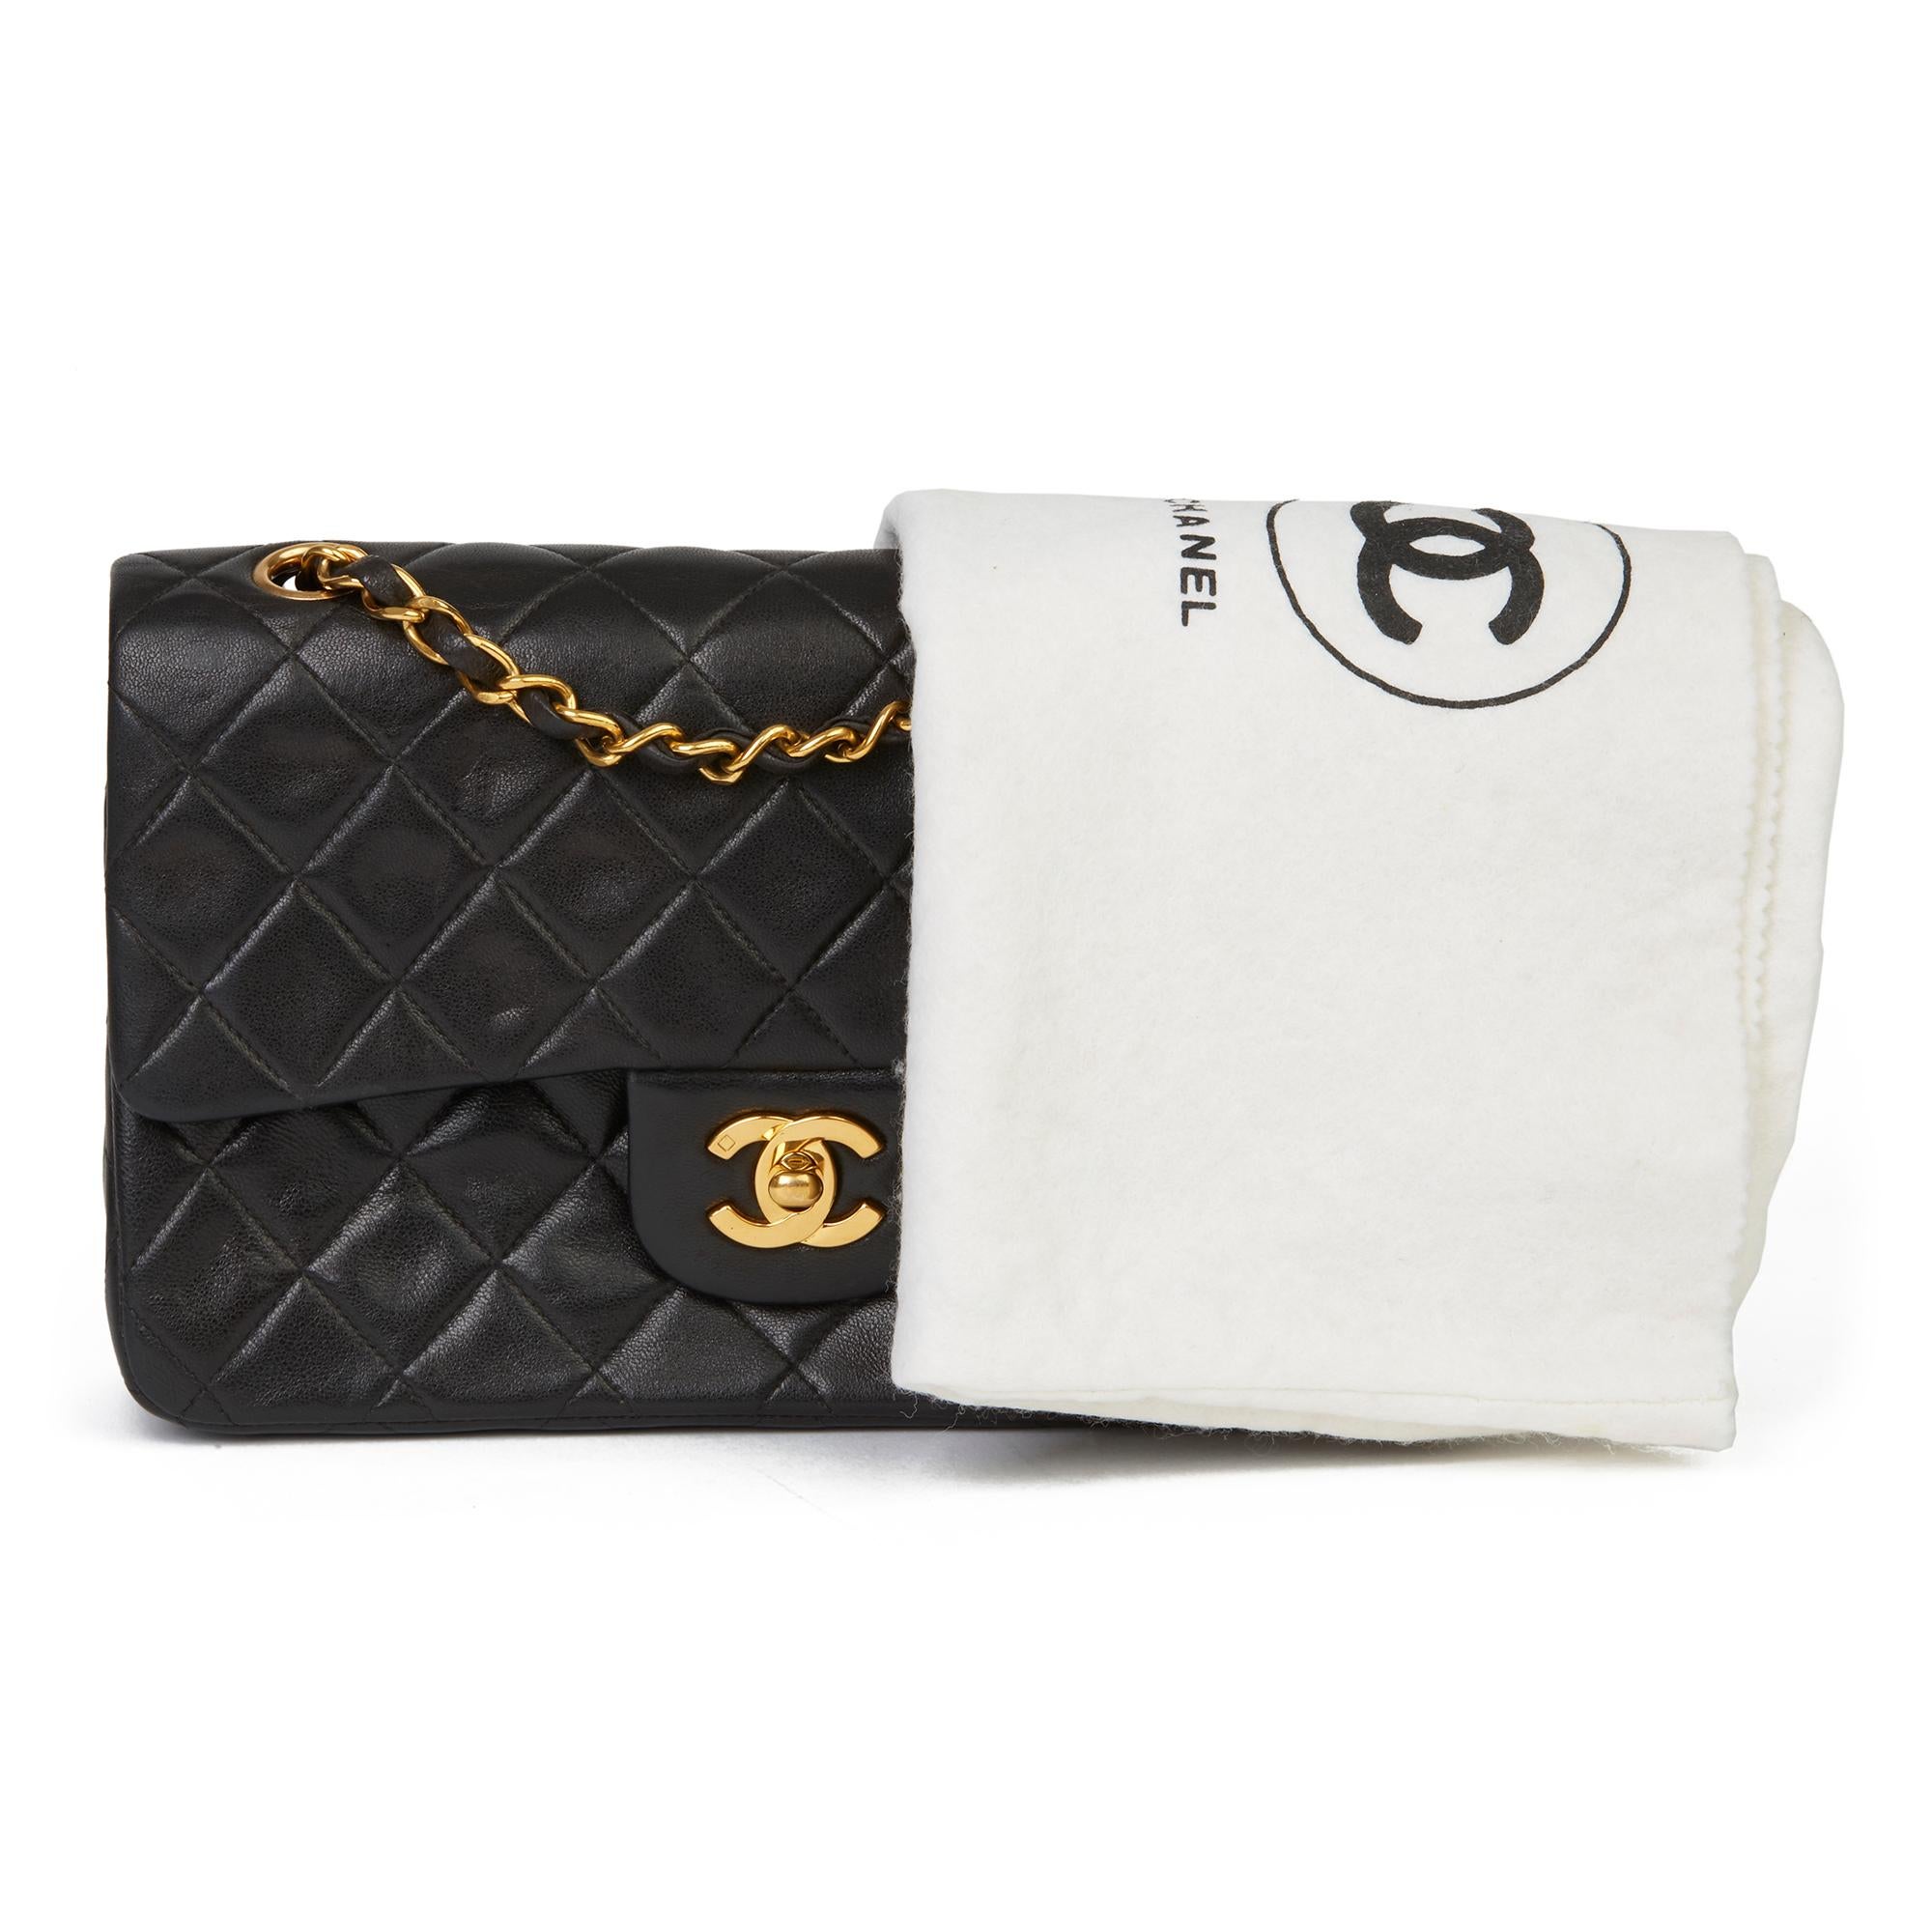 1996 Chanel Black Quilted Lambskin Vintage Small Classic Double Flap Bag  5